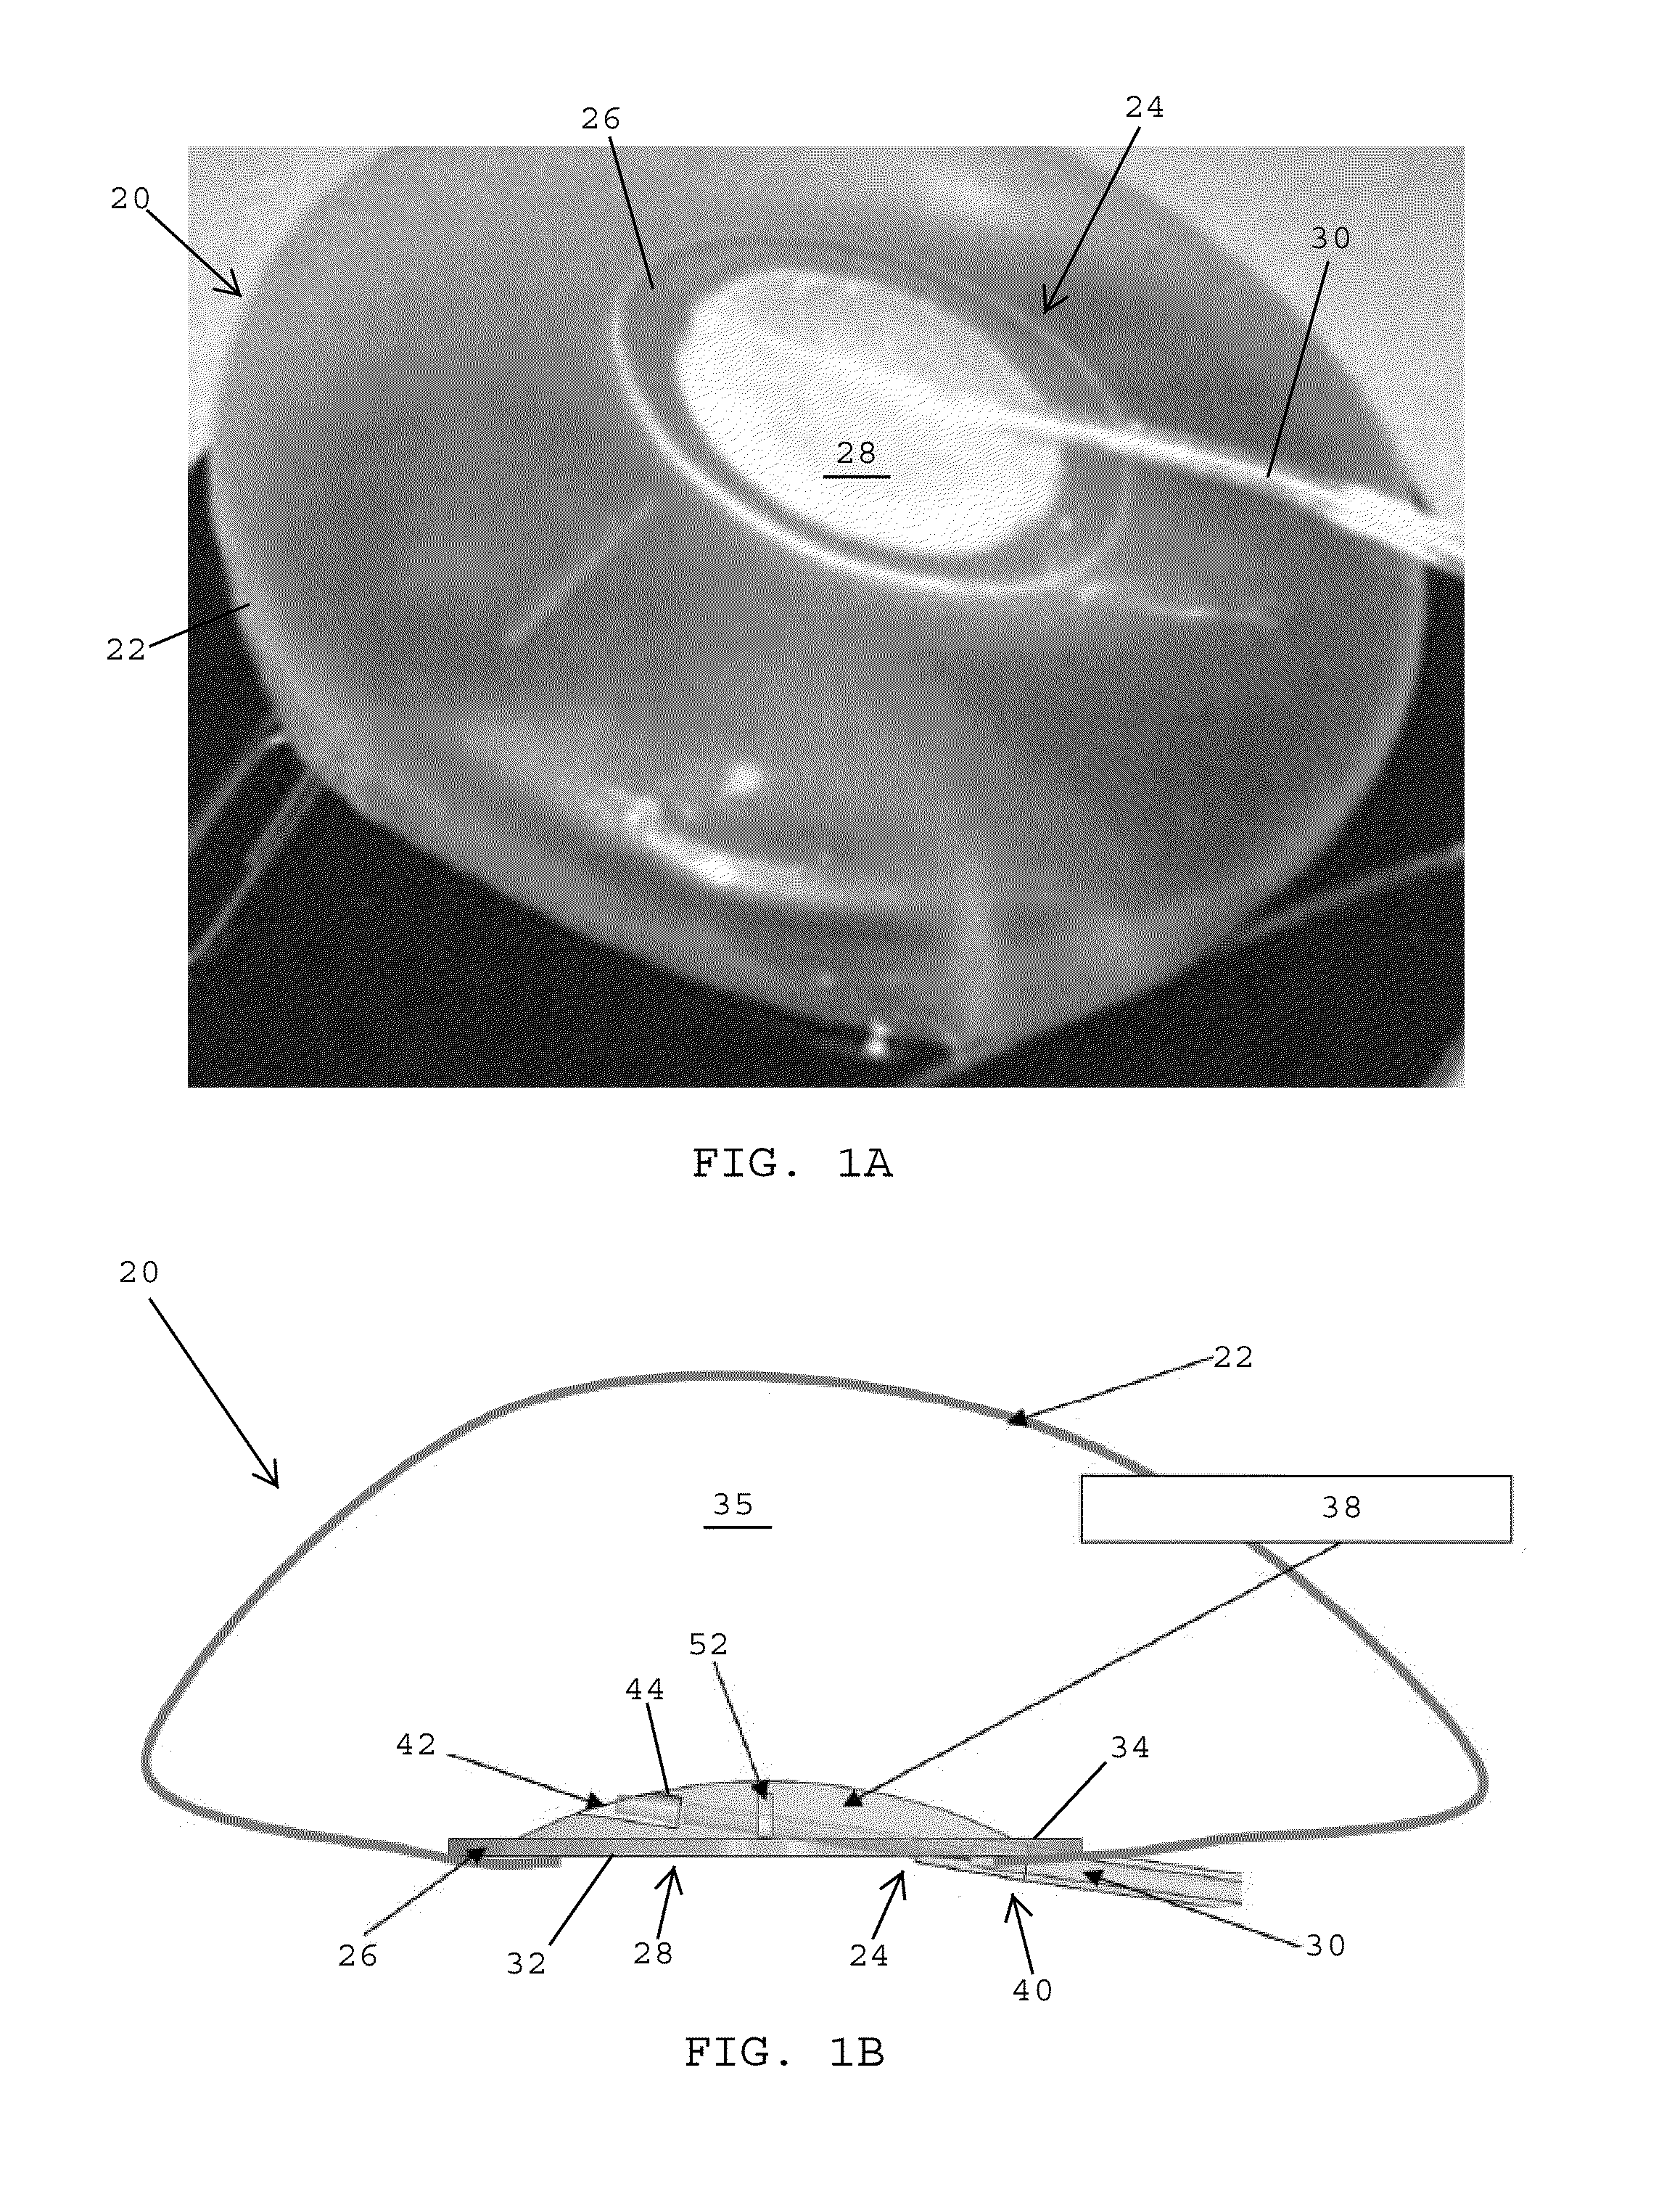 Valve assemblies for expandable implants and tissue expanders